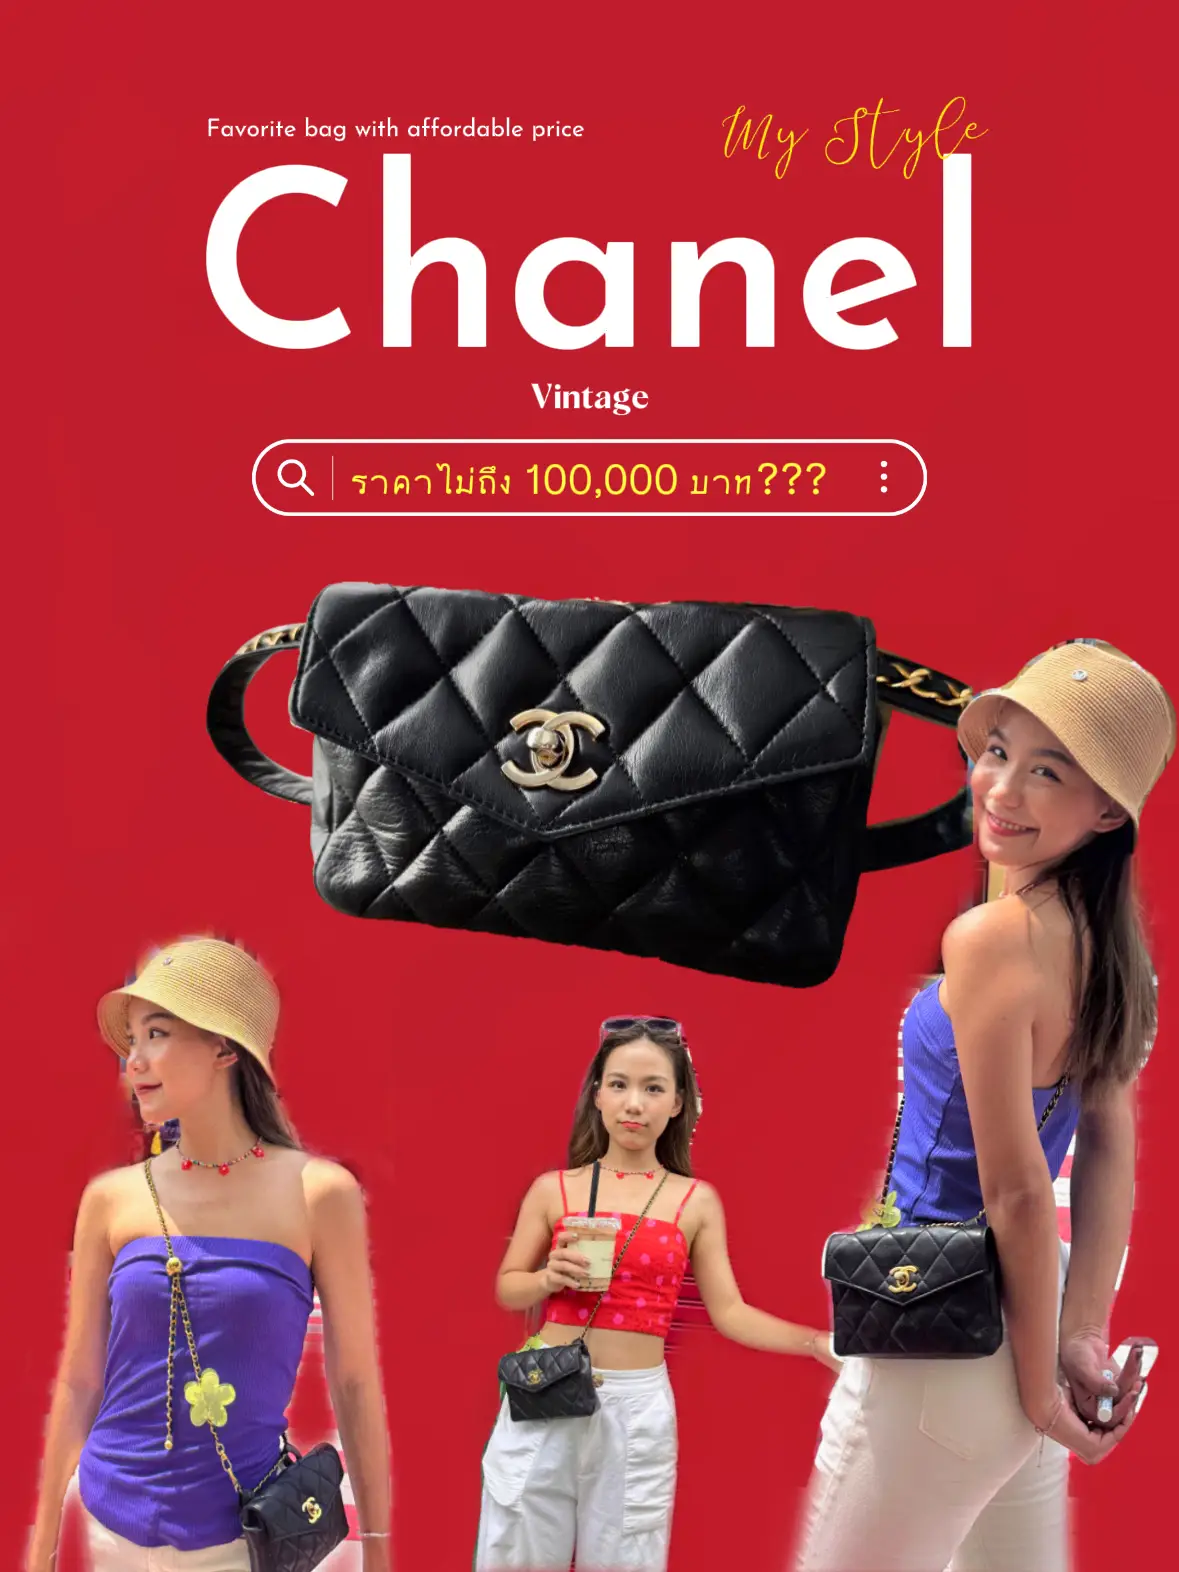 Chanel Bag Reach Price Not More Than 100K💸